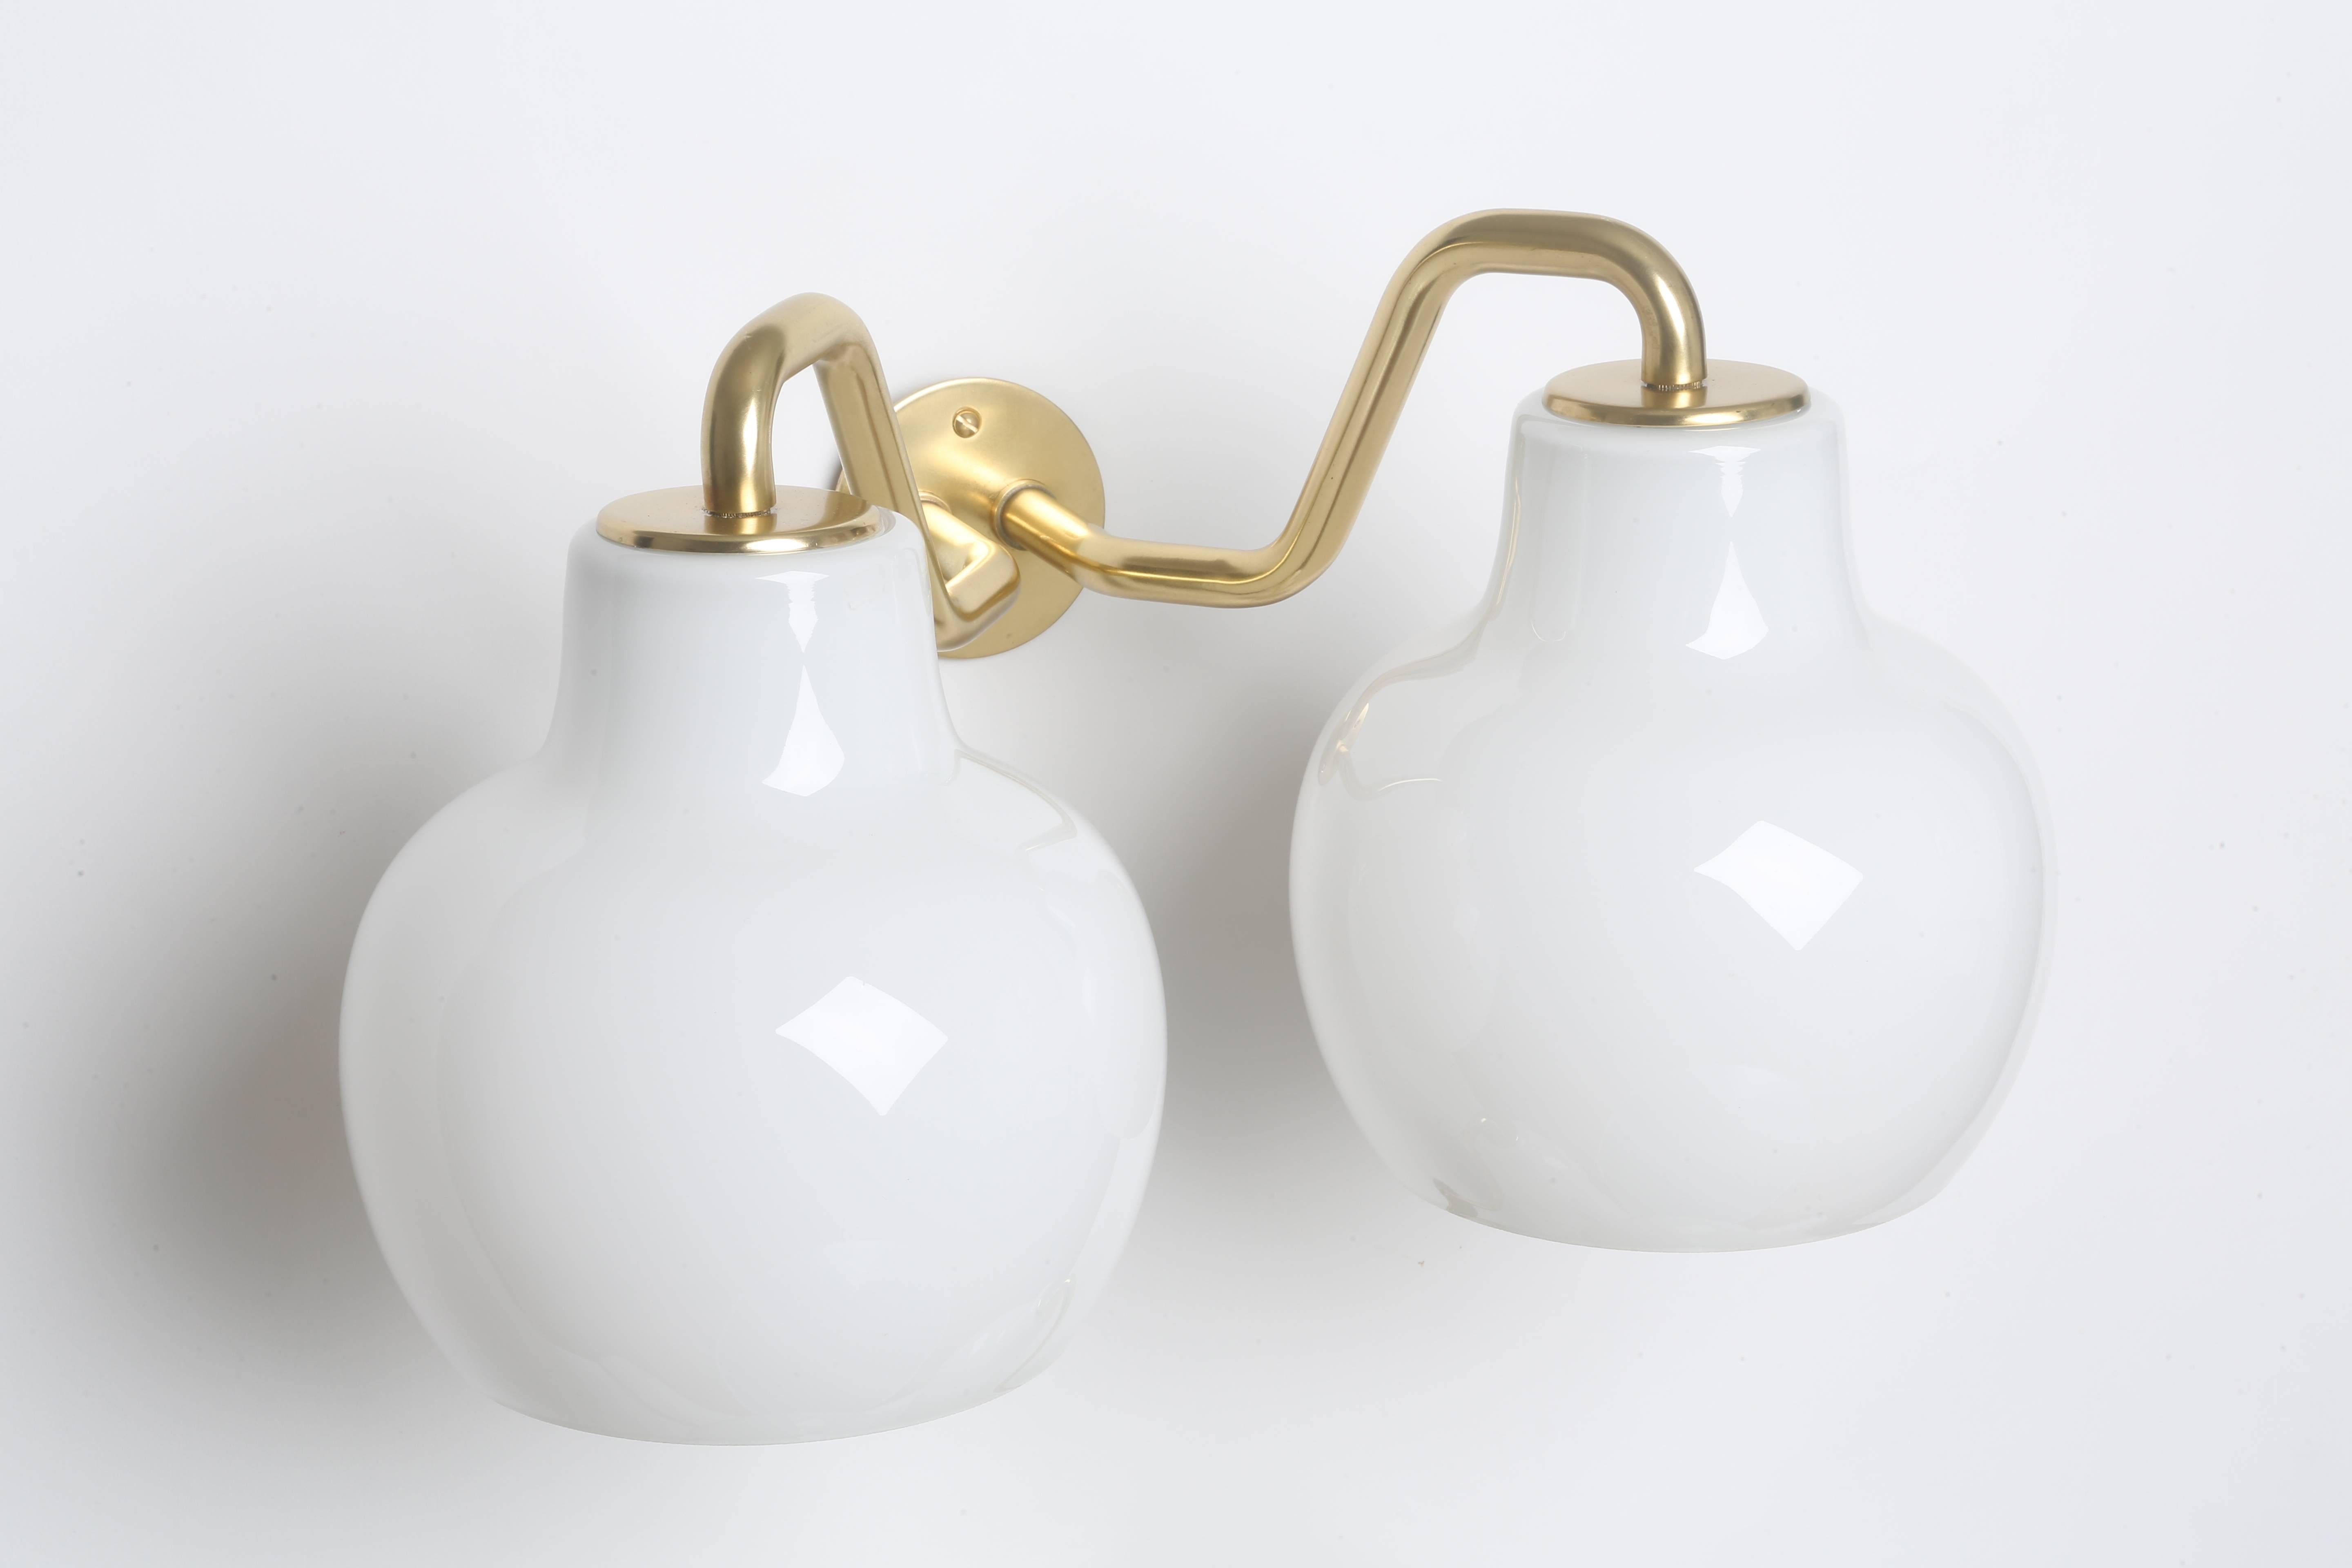 Wall lamp designed by Danish architect Vilhelm Lauritzen and
made by Louis Poulsen in 1950s.
Made with brass and opaline glass.

Six available.
Matching chandelier and ceiling pendants by Vilhelm Lauritzen are also available.